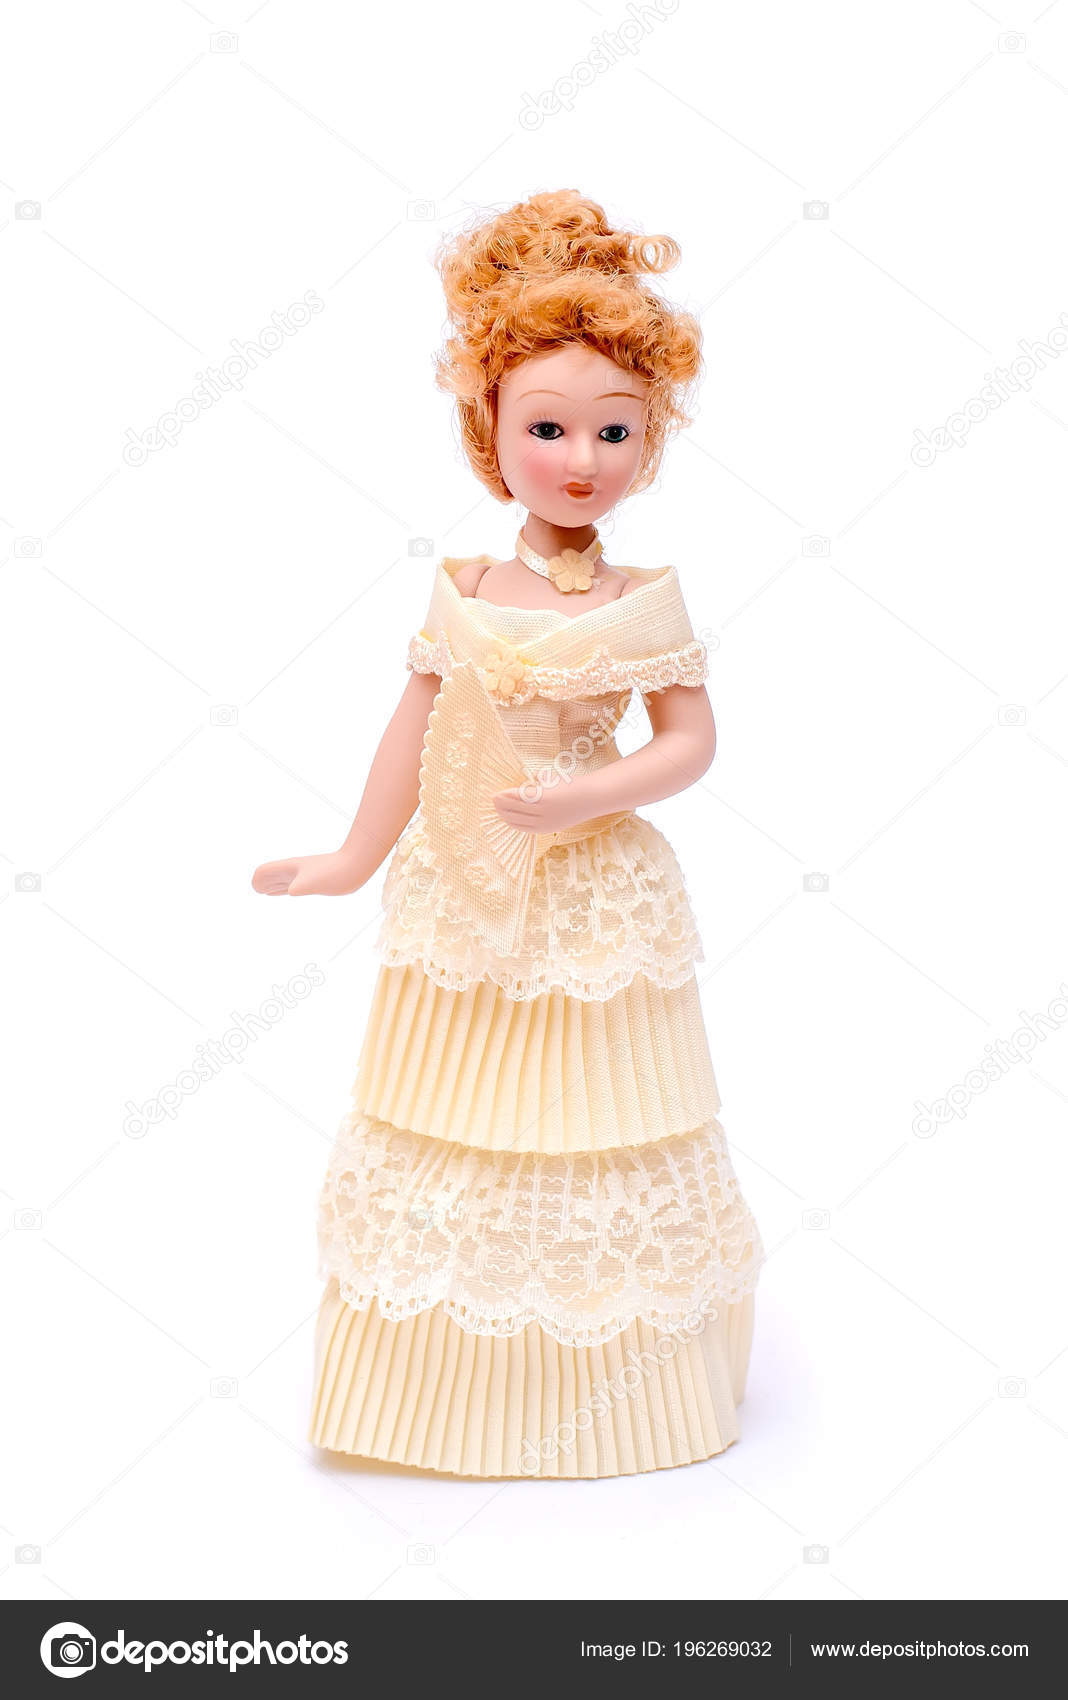 Beautiful Porcelain Doll Red Curly Hair Hairstyle Beige